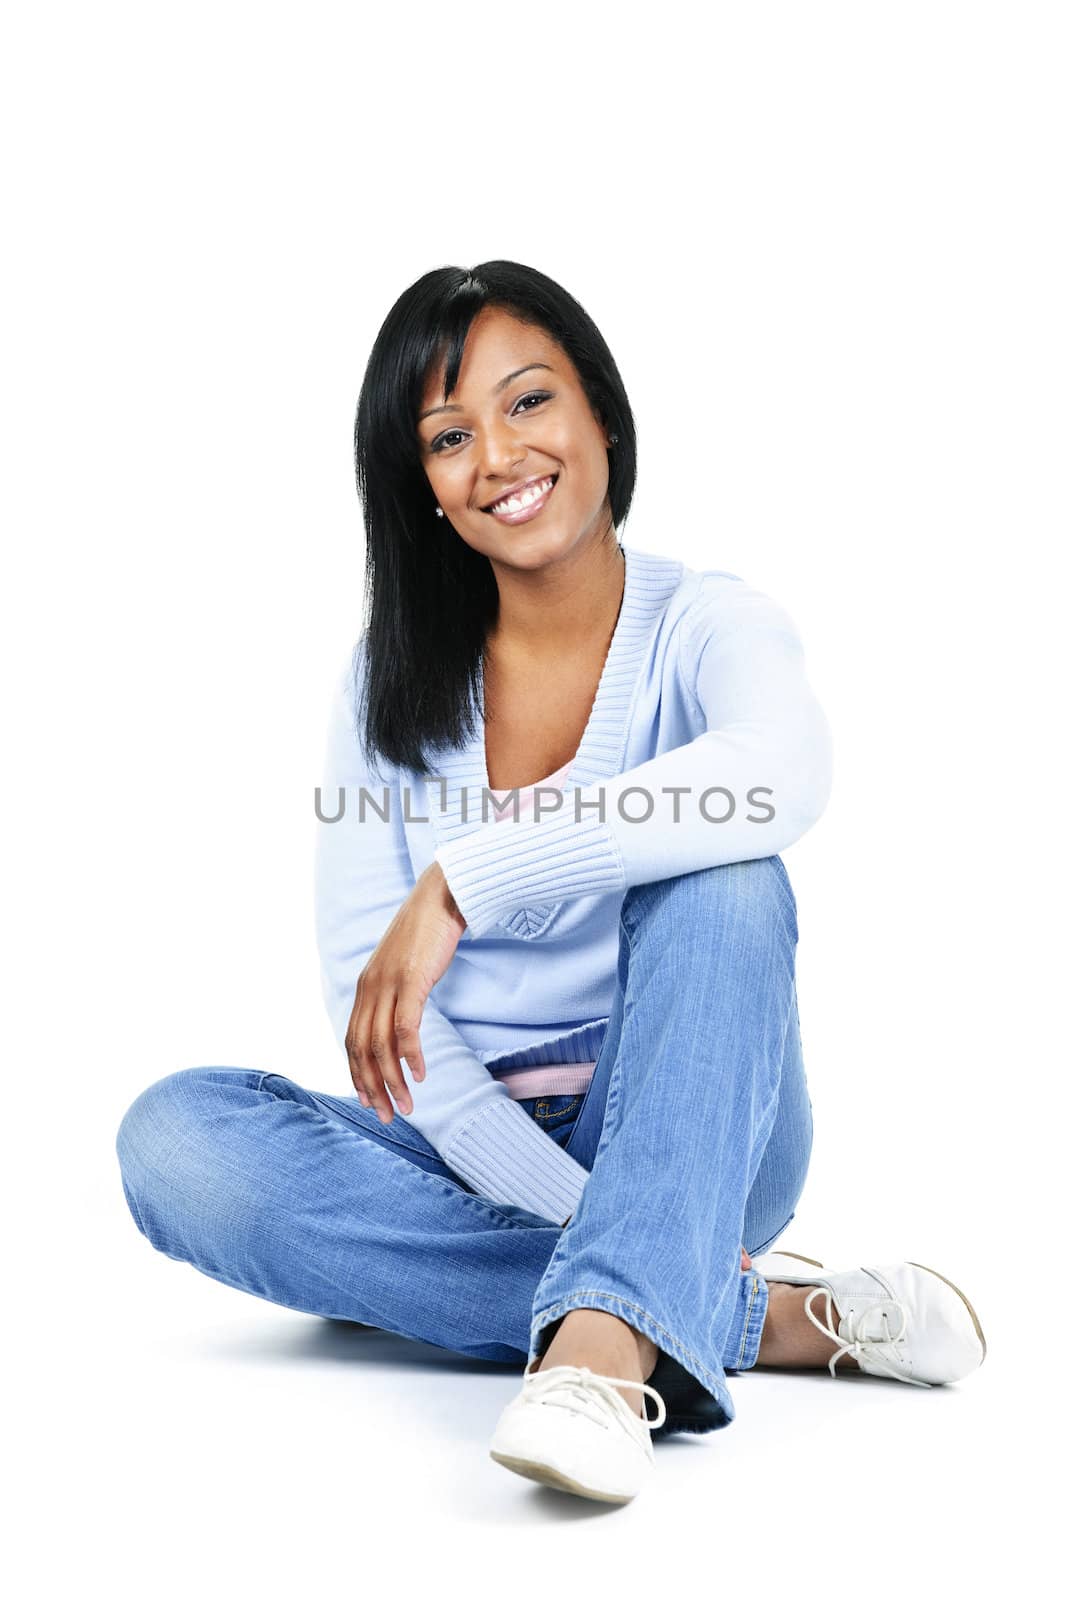 Relaxing black woman sitting on floor isolated on white background